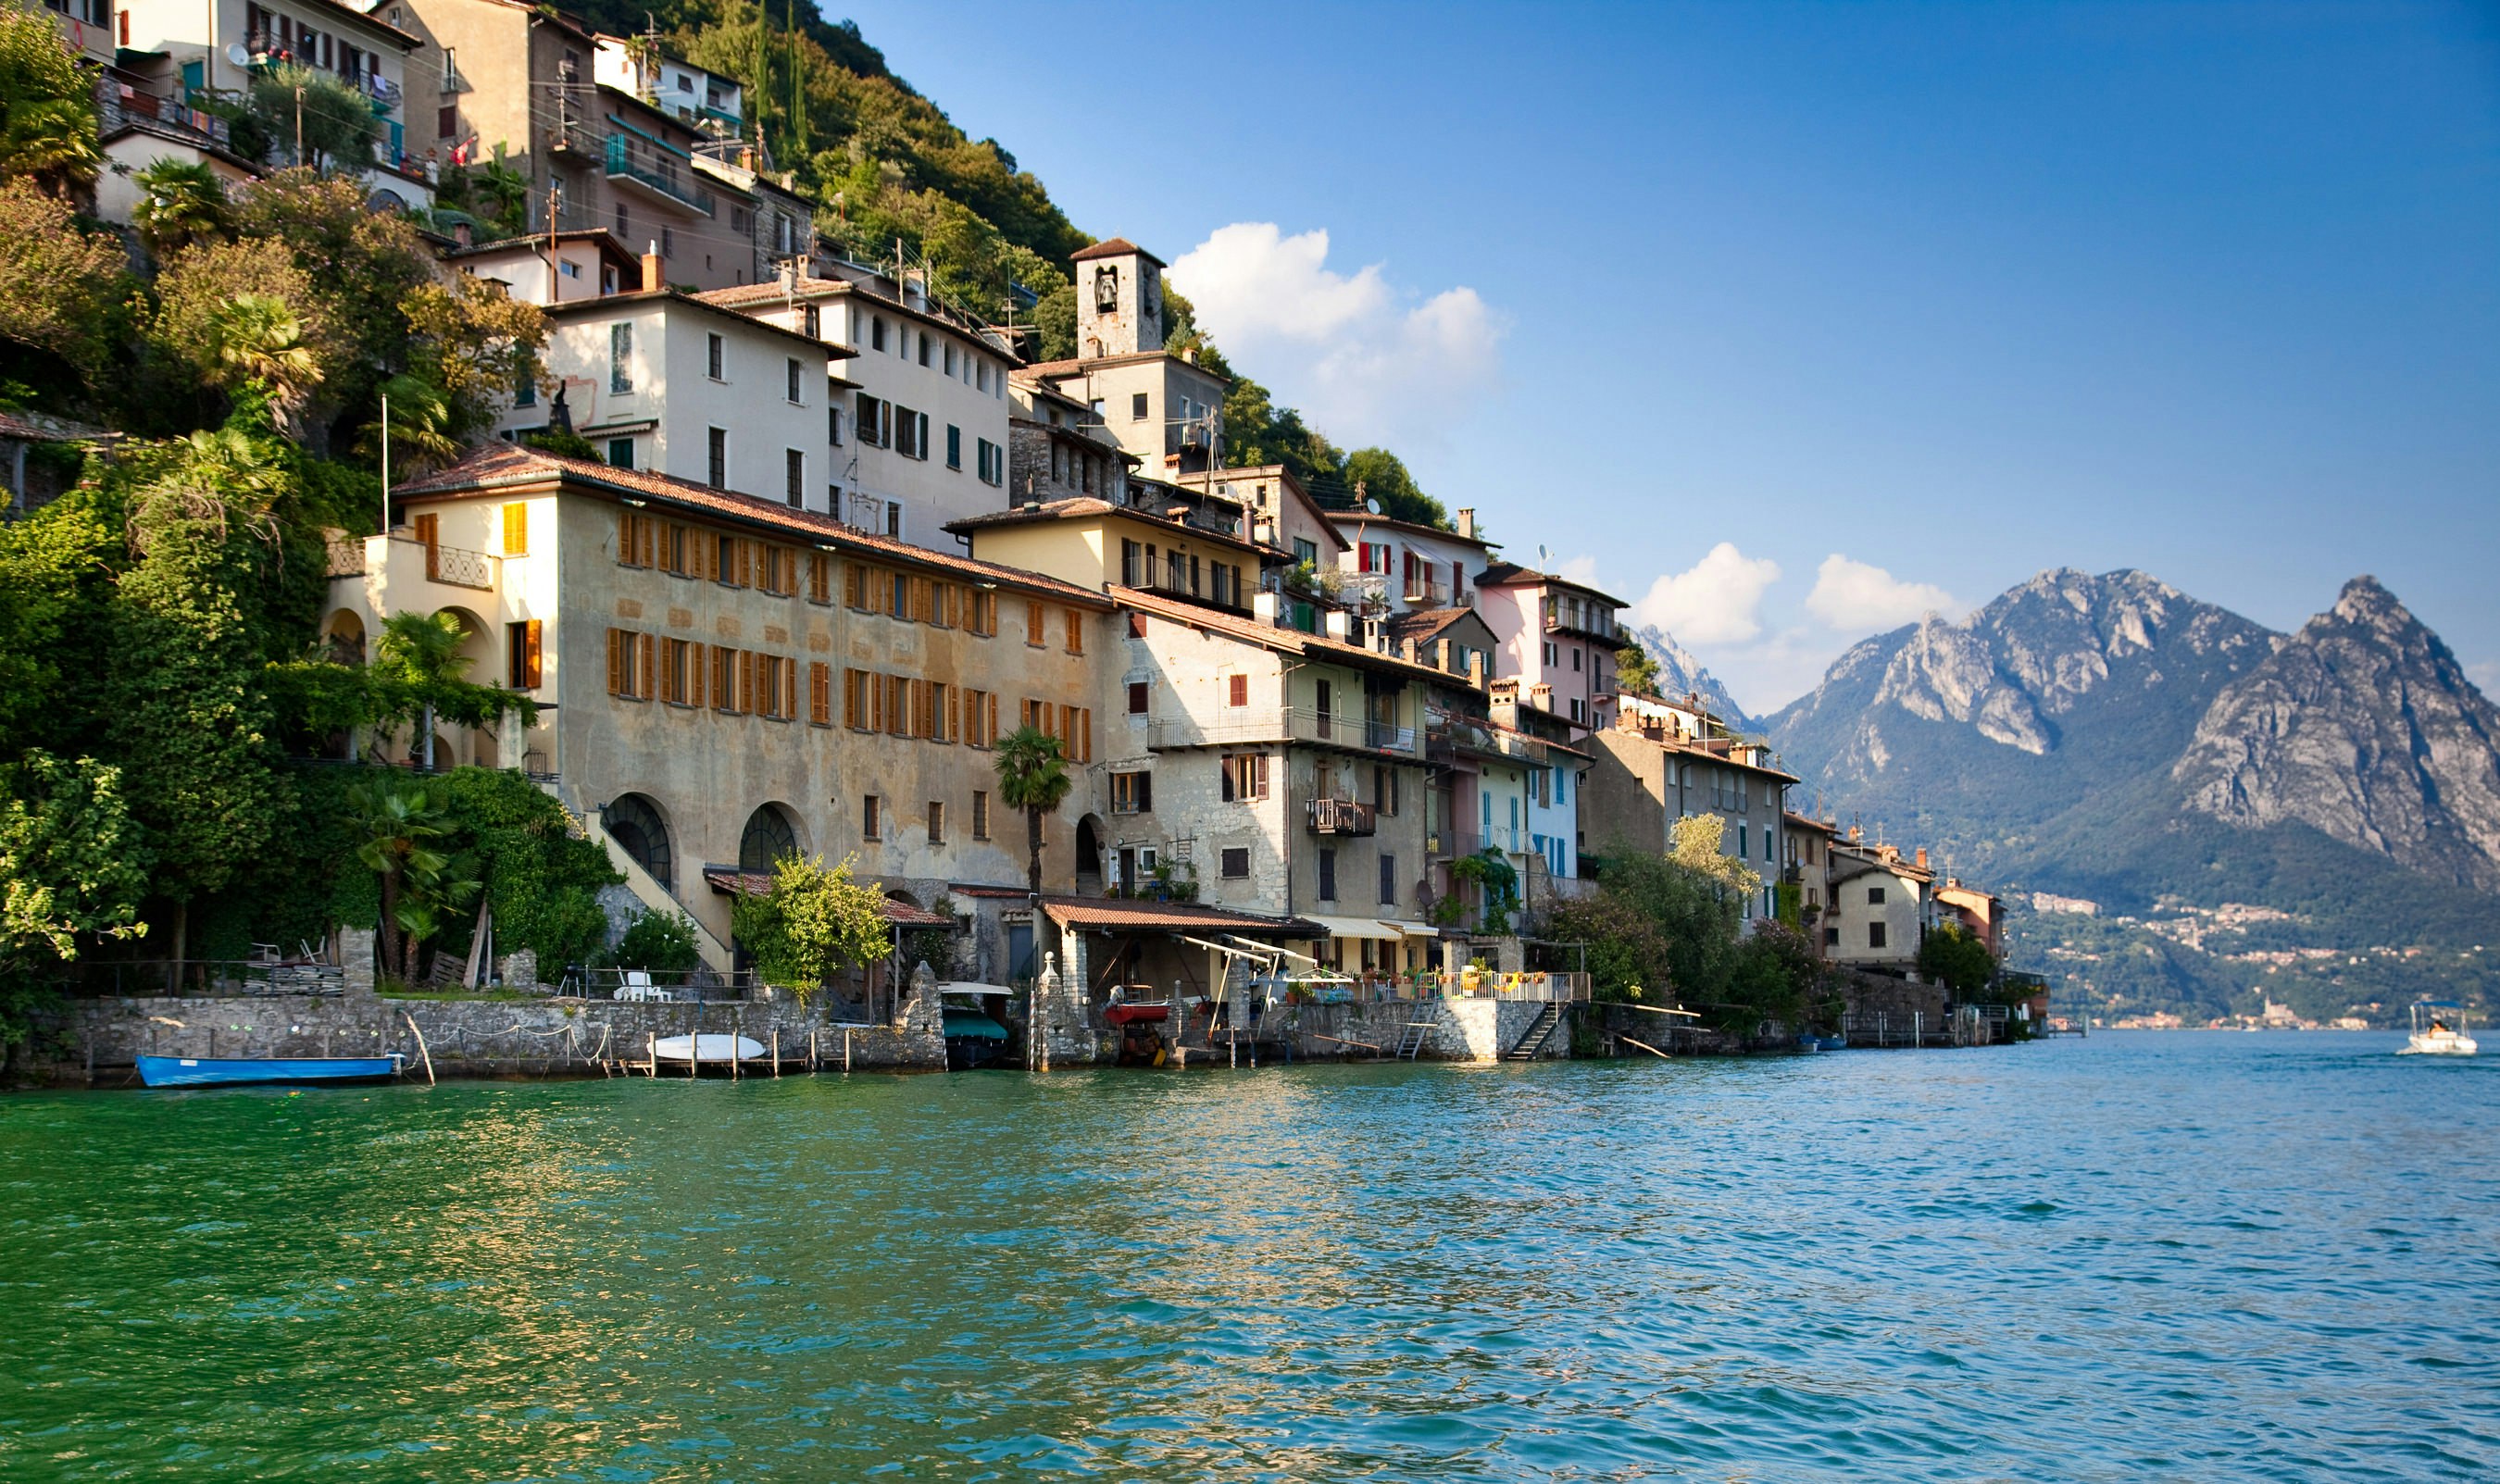 A picture of Lake Lugano and a picturesque town on its shores